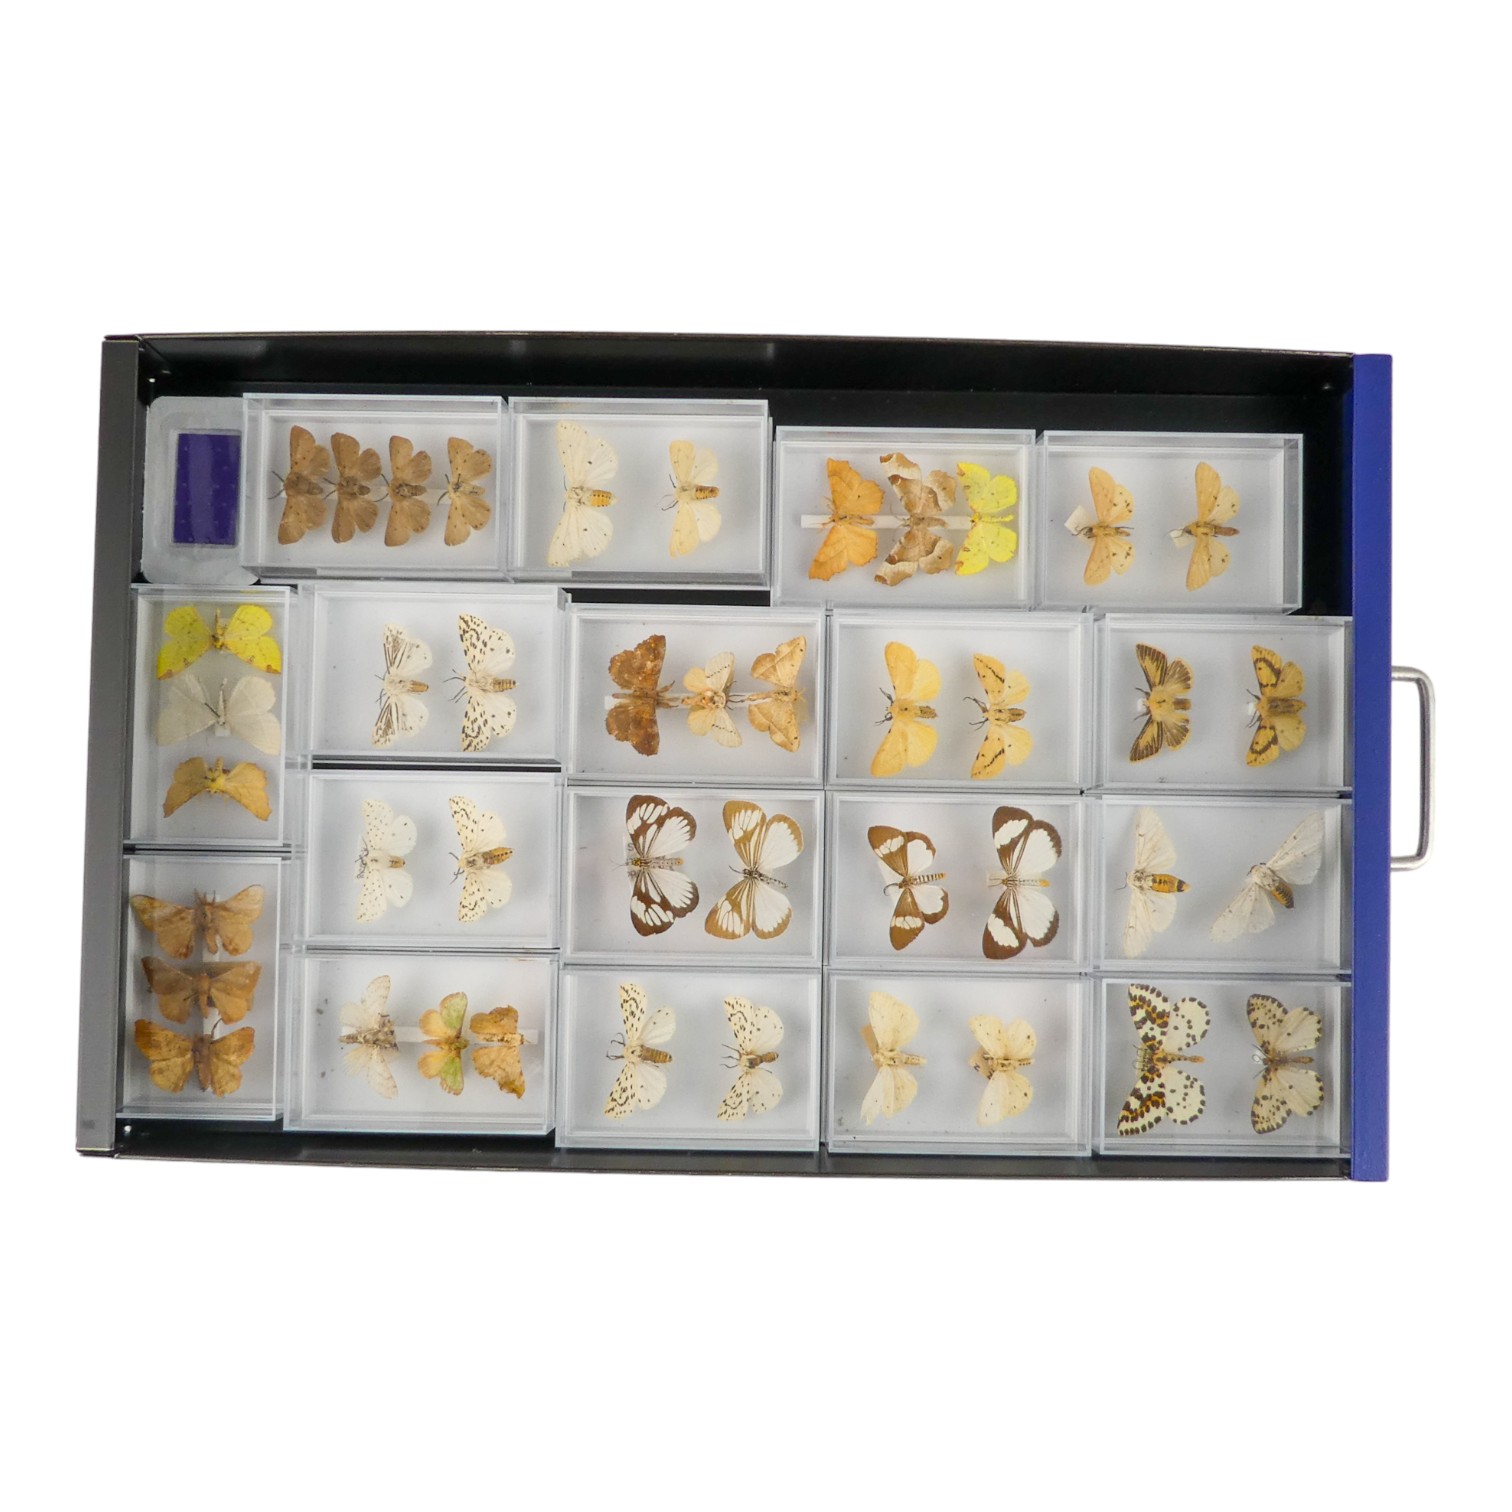 A fifteen drawer metal filing cabinet - containing nine drawers of moths - Image 5 of 11